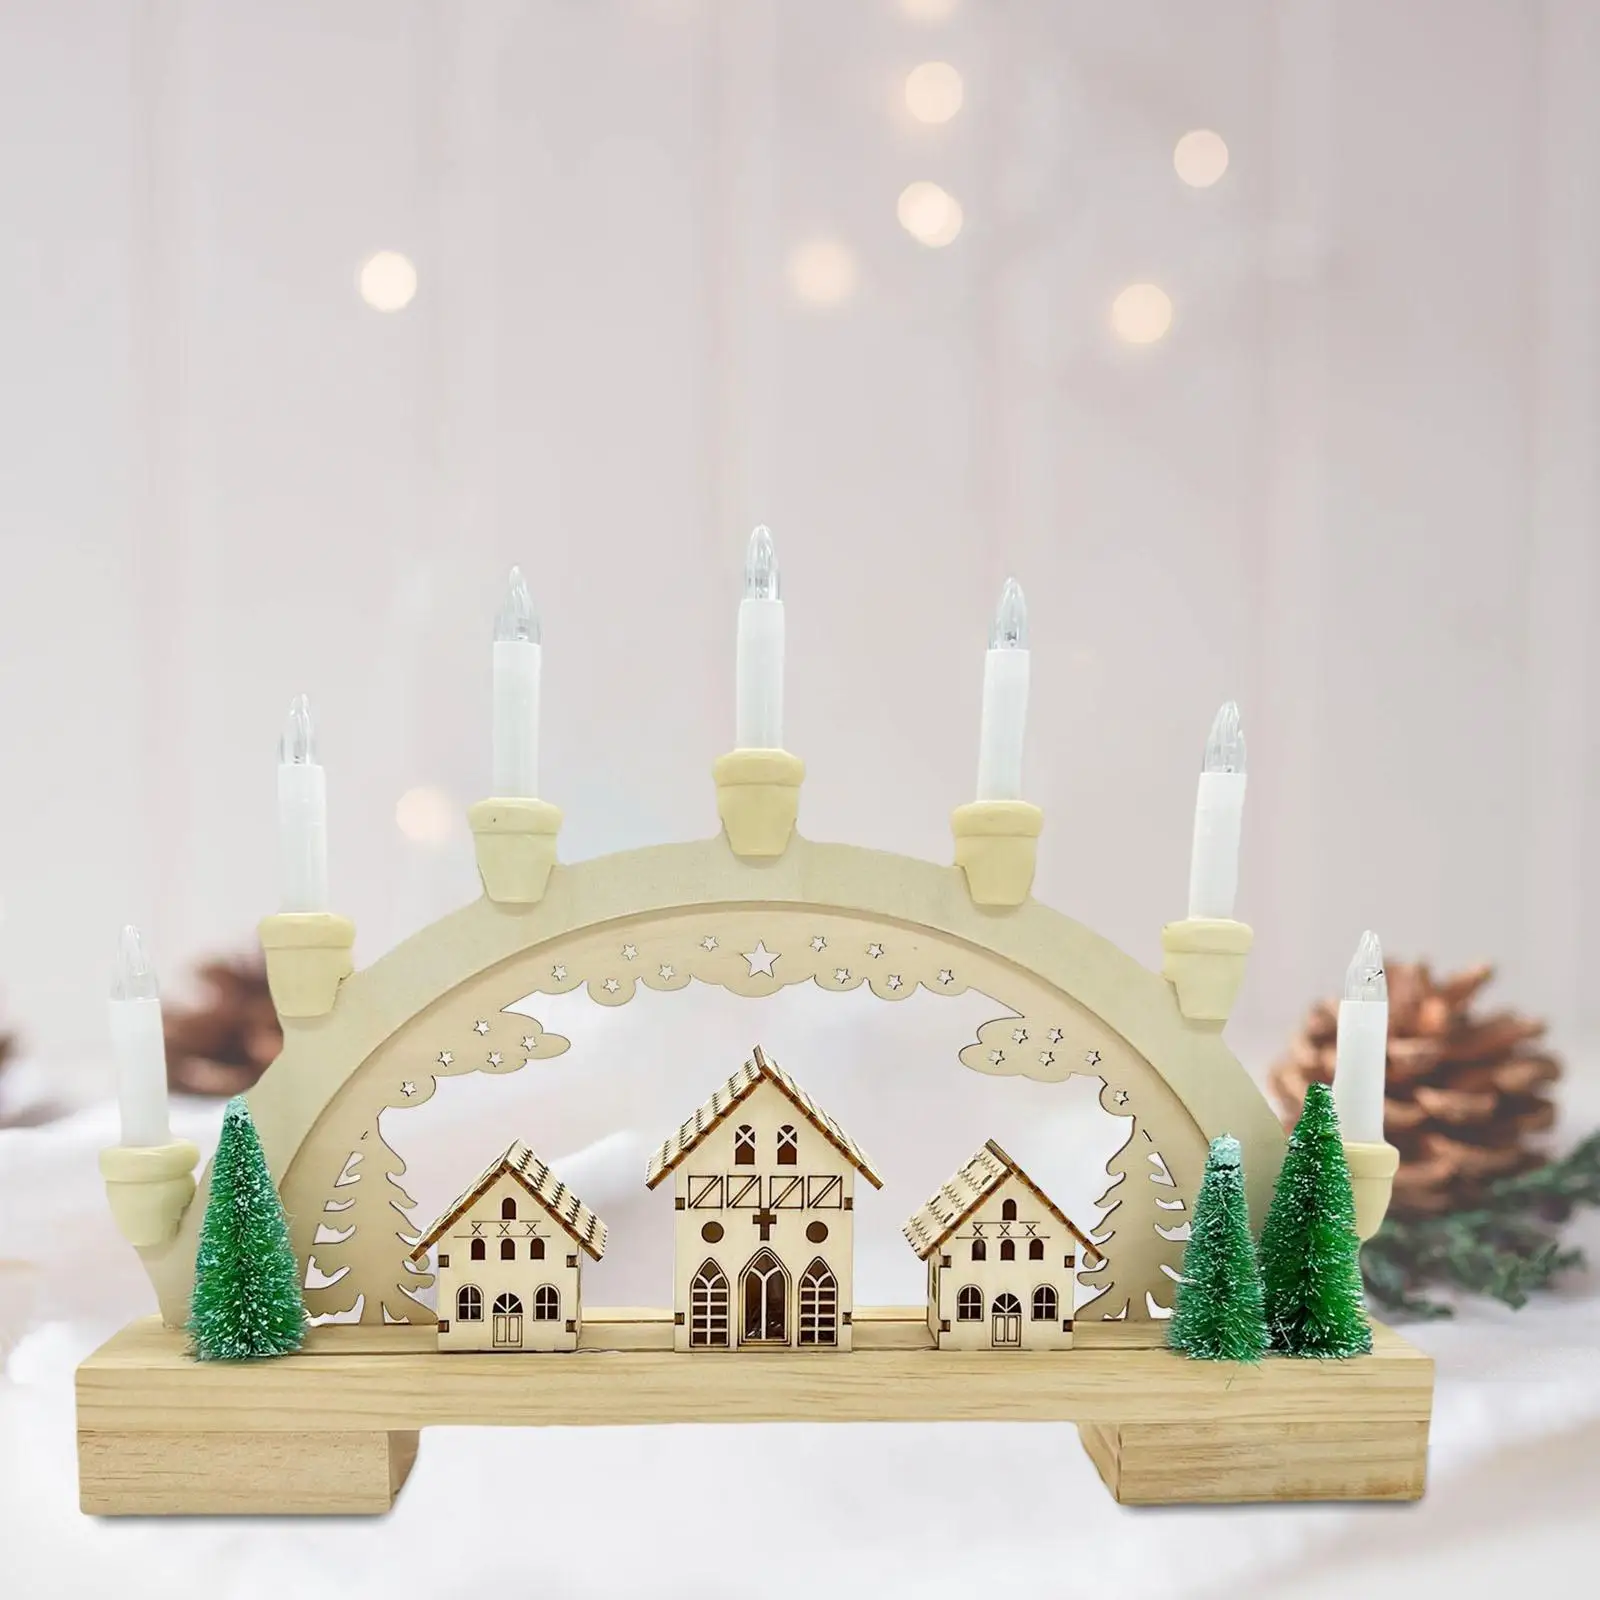 Holiday Atmosphere Light Ornament with Lights Village Houses Town Creative Holiday Ornament for Bedroom Decorative Ornaments